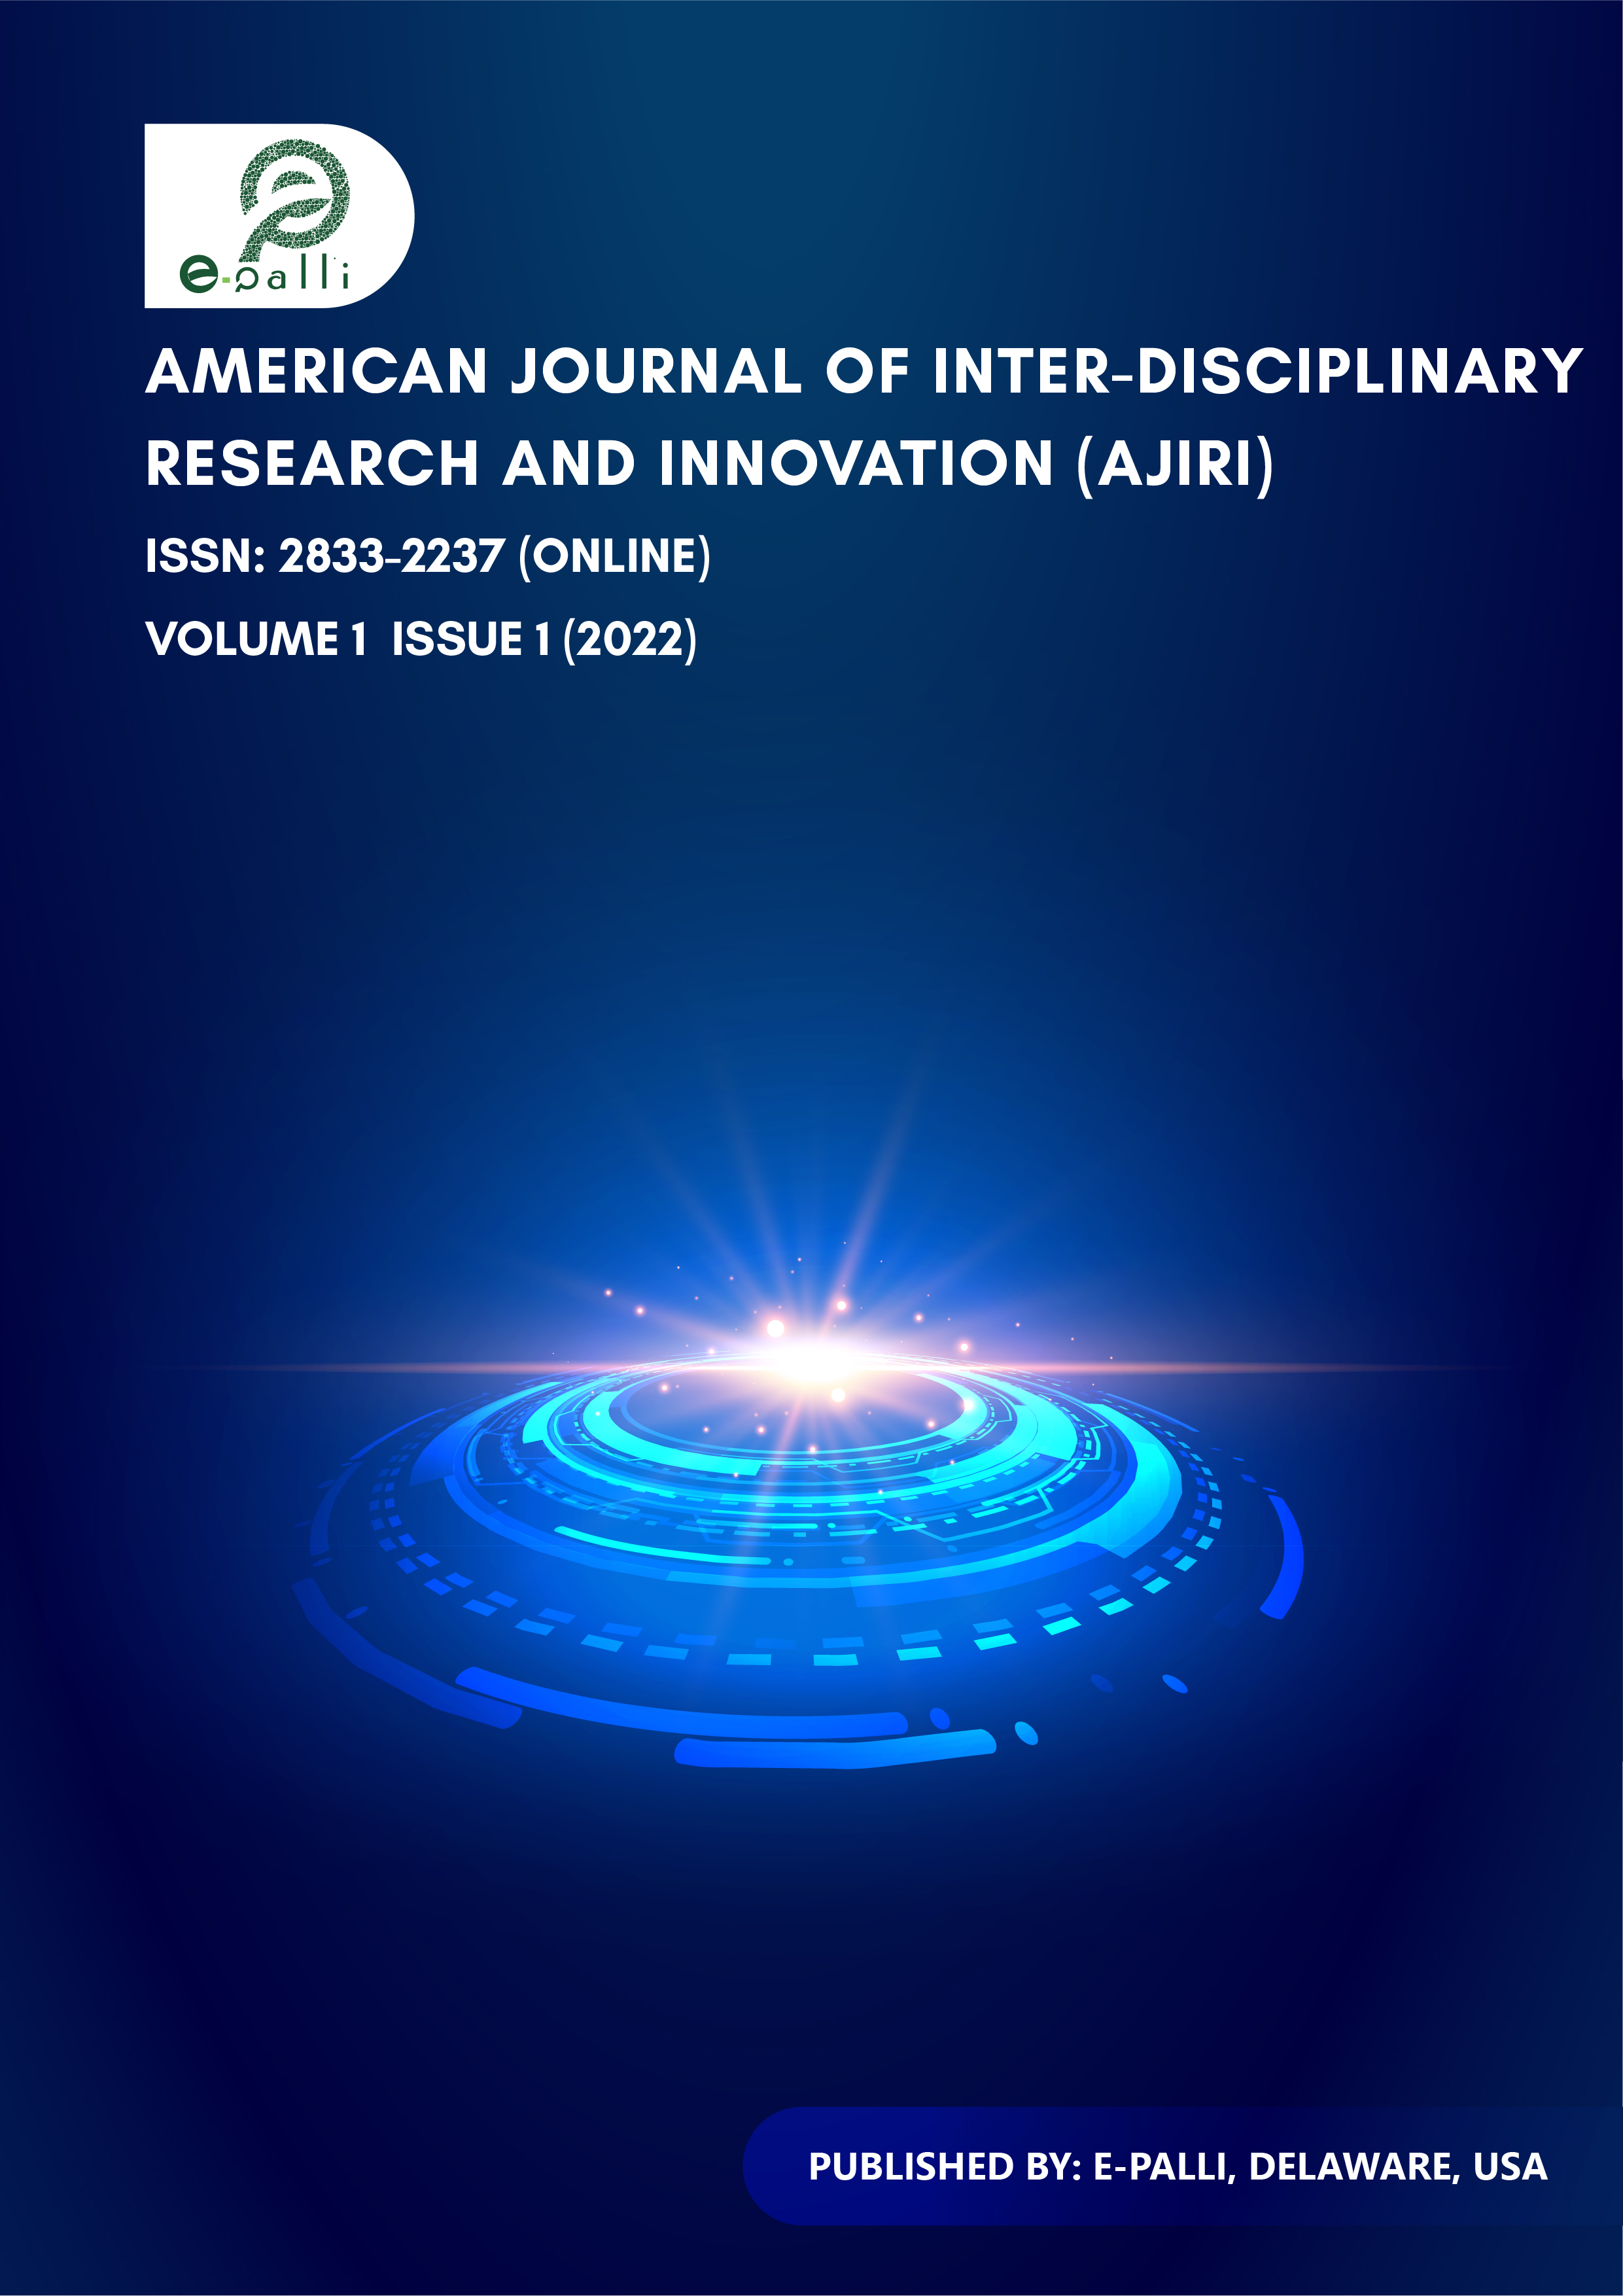 					View Vol. 1 No. 1 (2022): American Journal of Interdisciplinary Research and Innovation
				